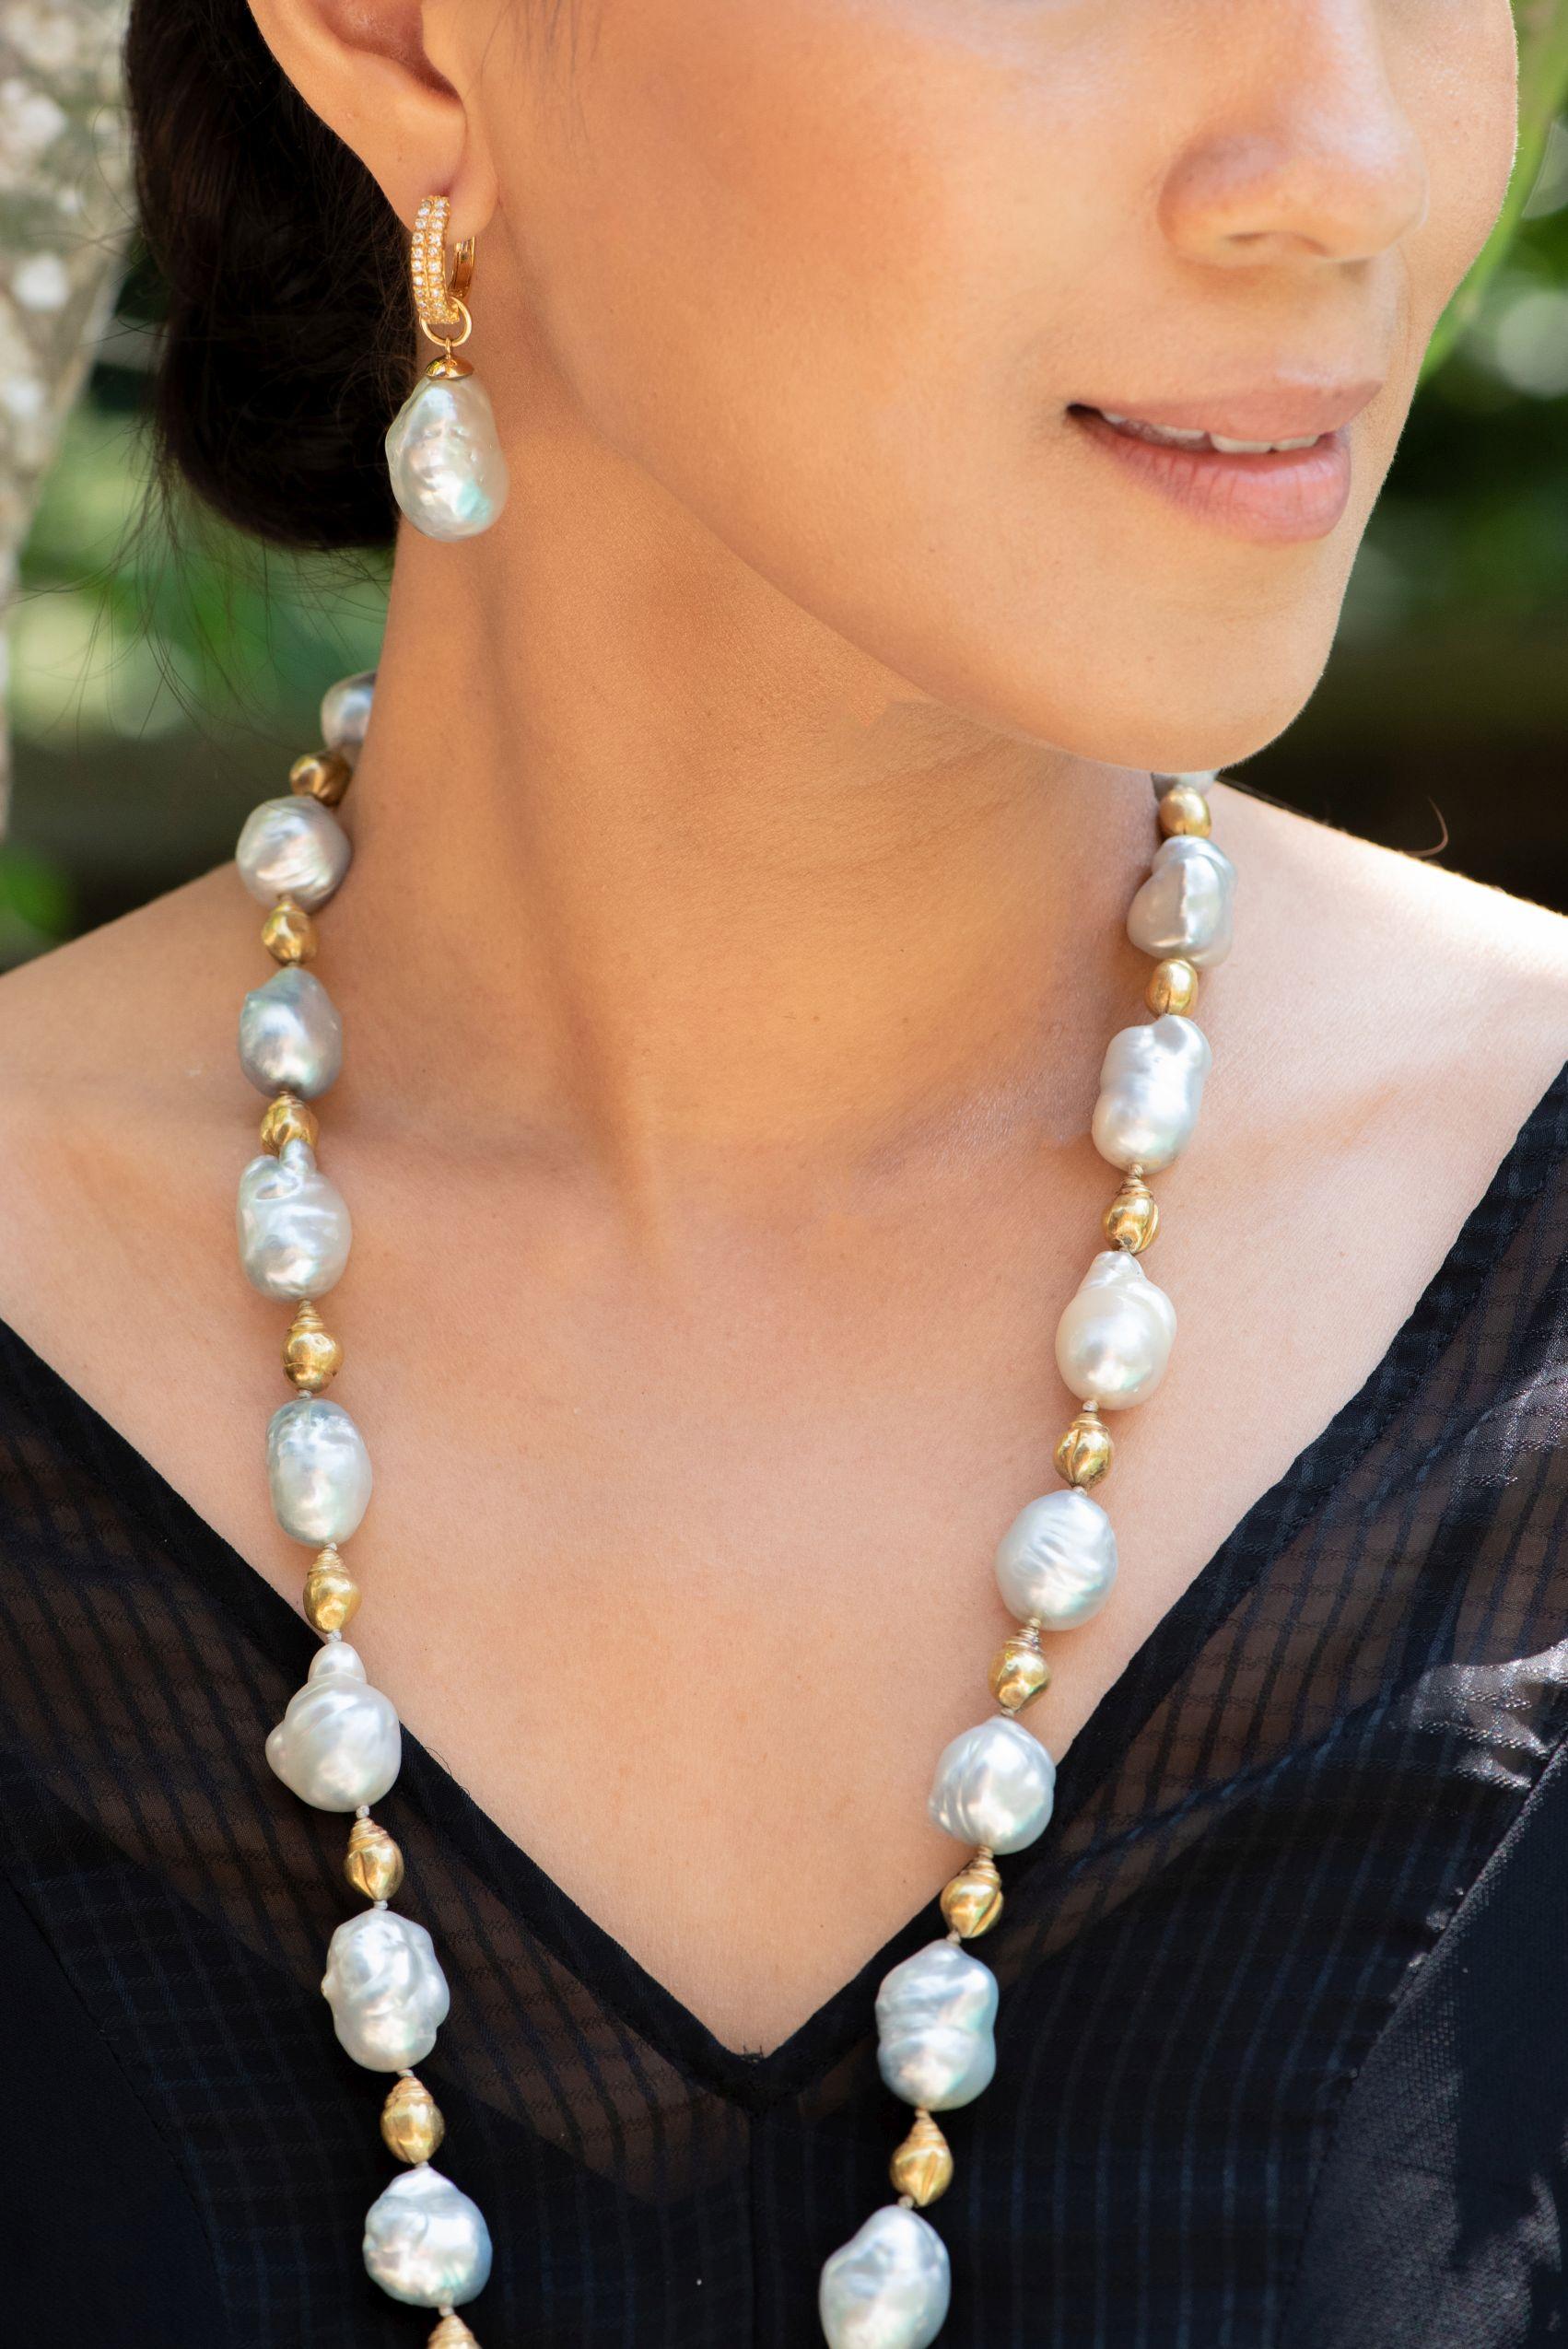 14 Century Gold Beads Oversized Blueish Baroque South Sea Pearls Beaded Necklace For Sale 1